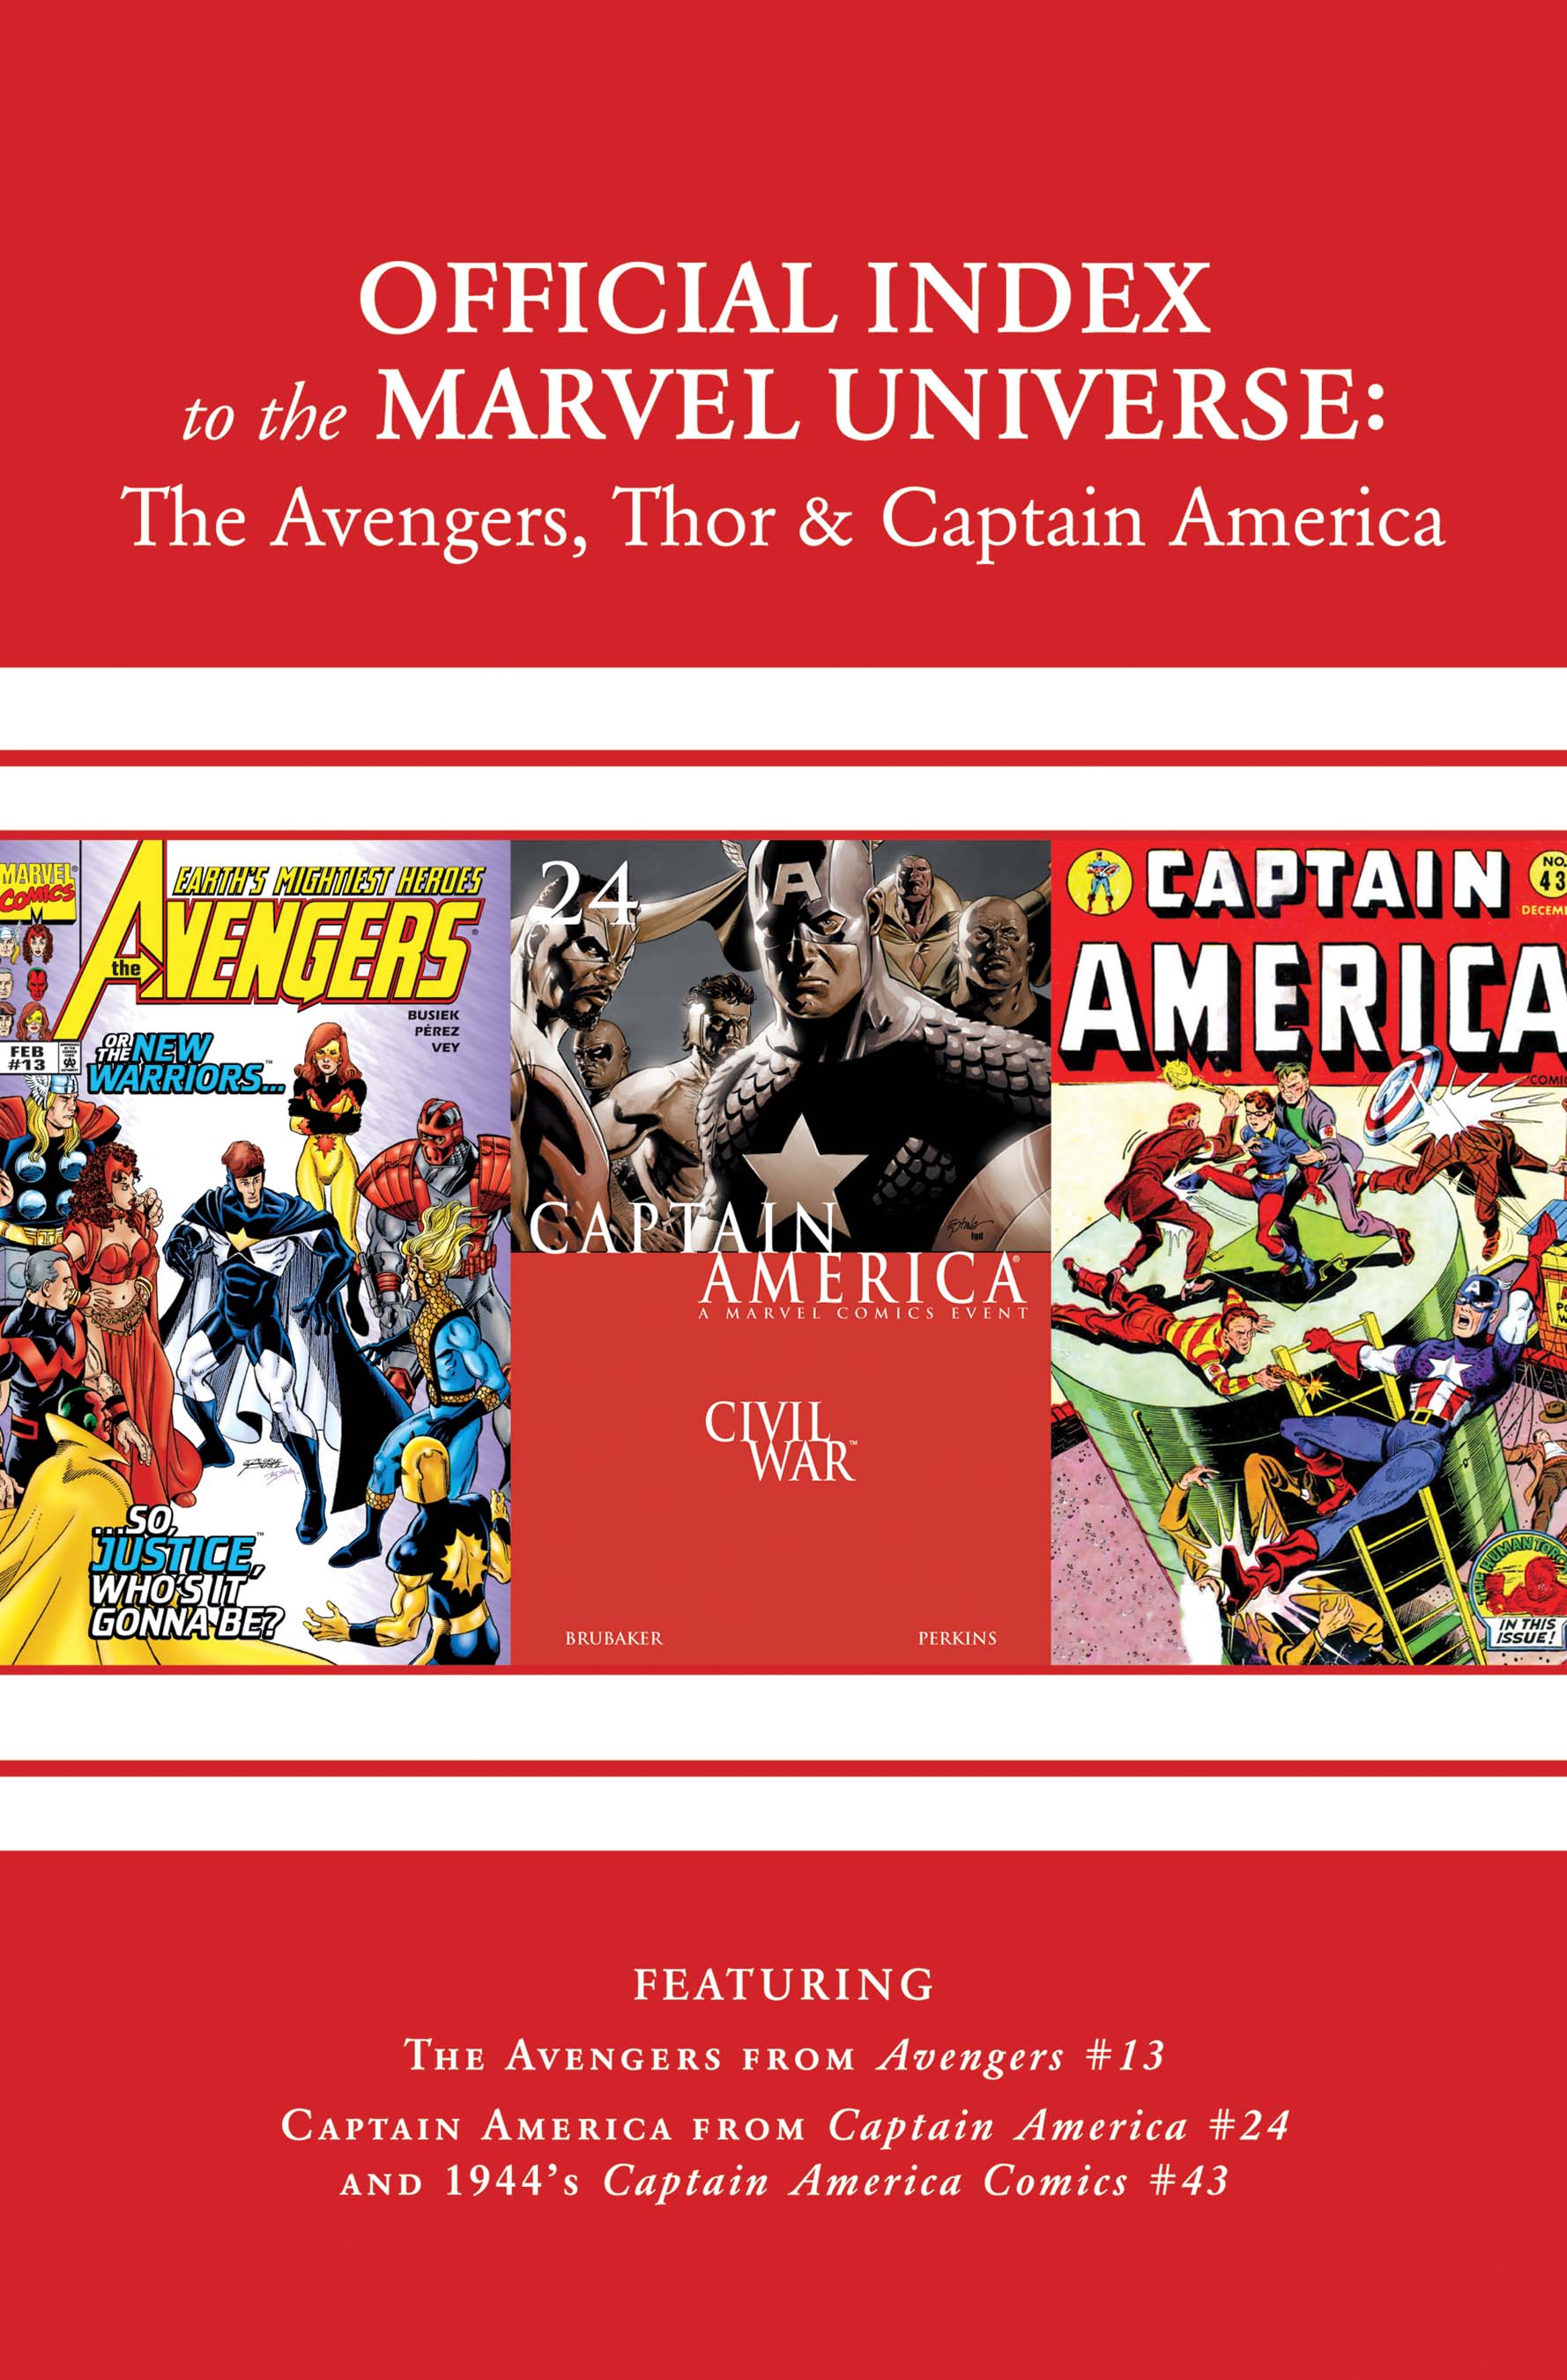 Avengers, Thor & Captain America: Official Index to the Marvel Universe (2011) #14